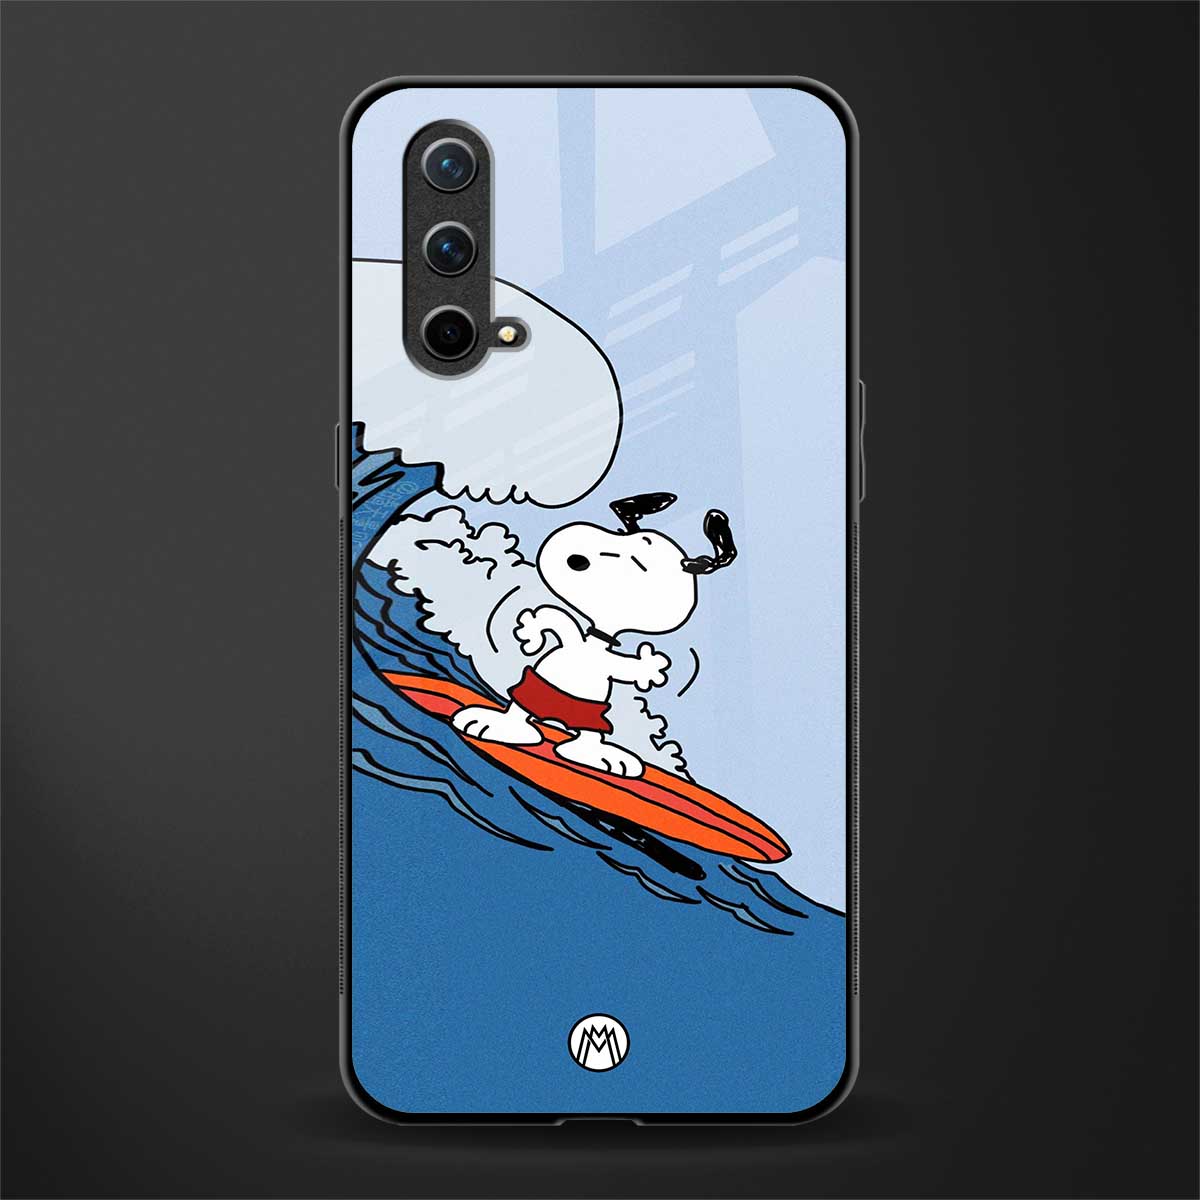 snoopy surfing glass case for oneplus nord ce 5g image